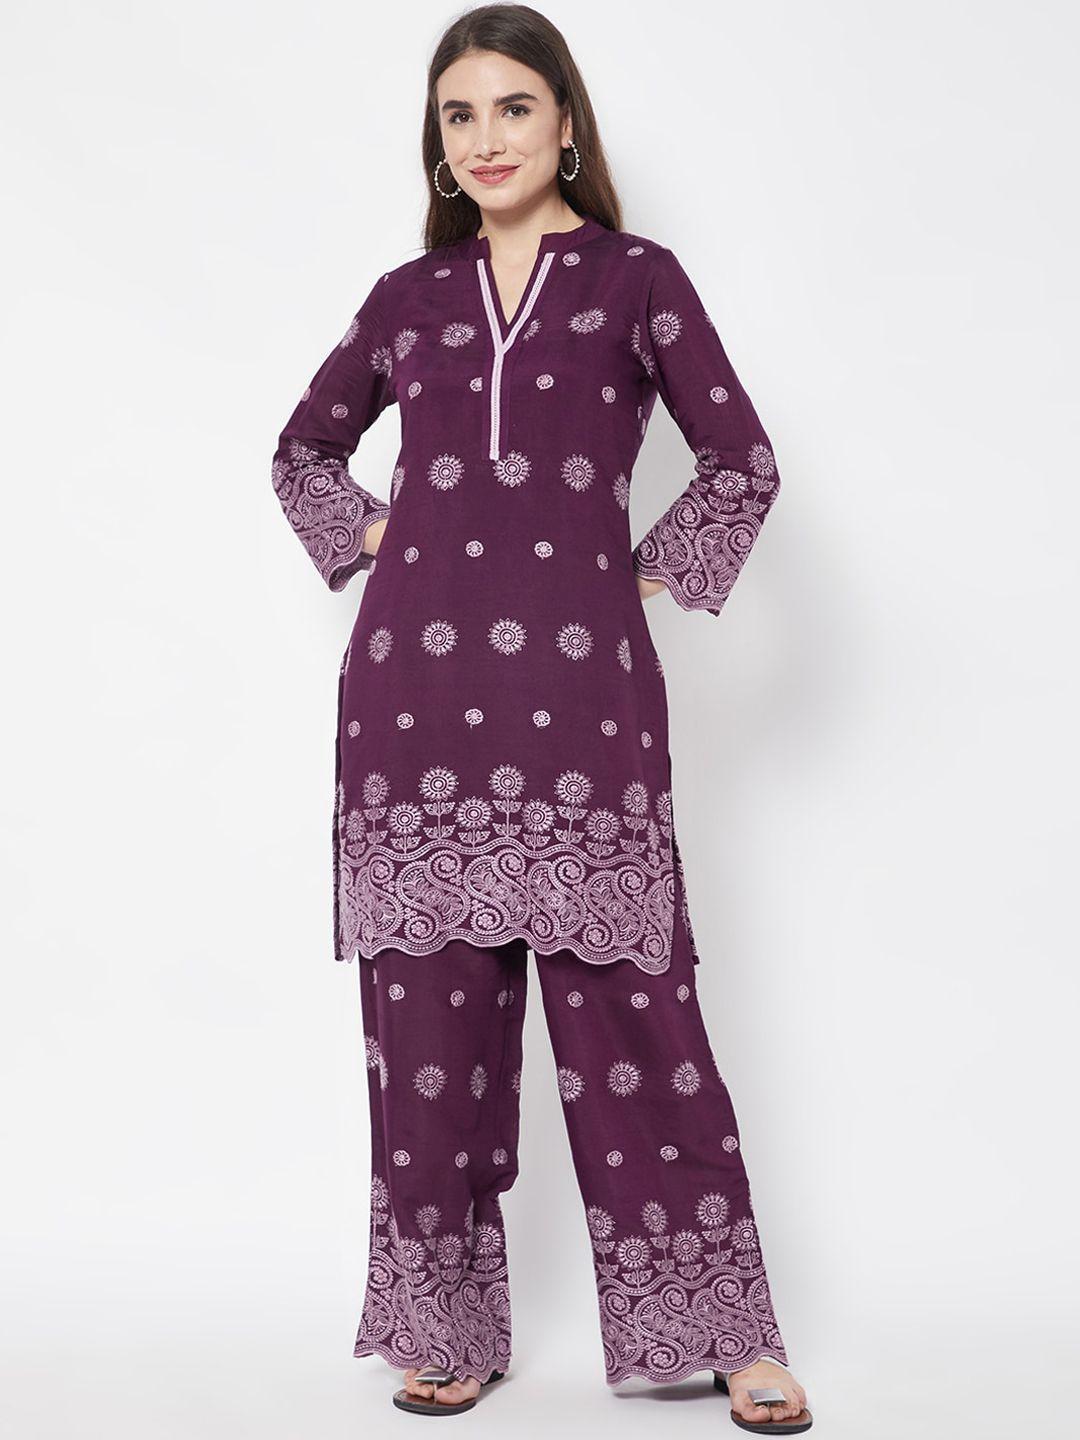 heeposh-women-purple-&-lavender-floral-embroidered-kurta-with-trousers-&-with-dupatta